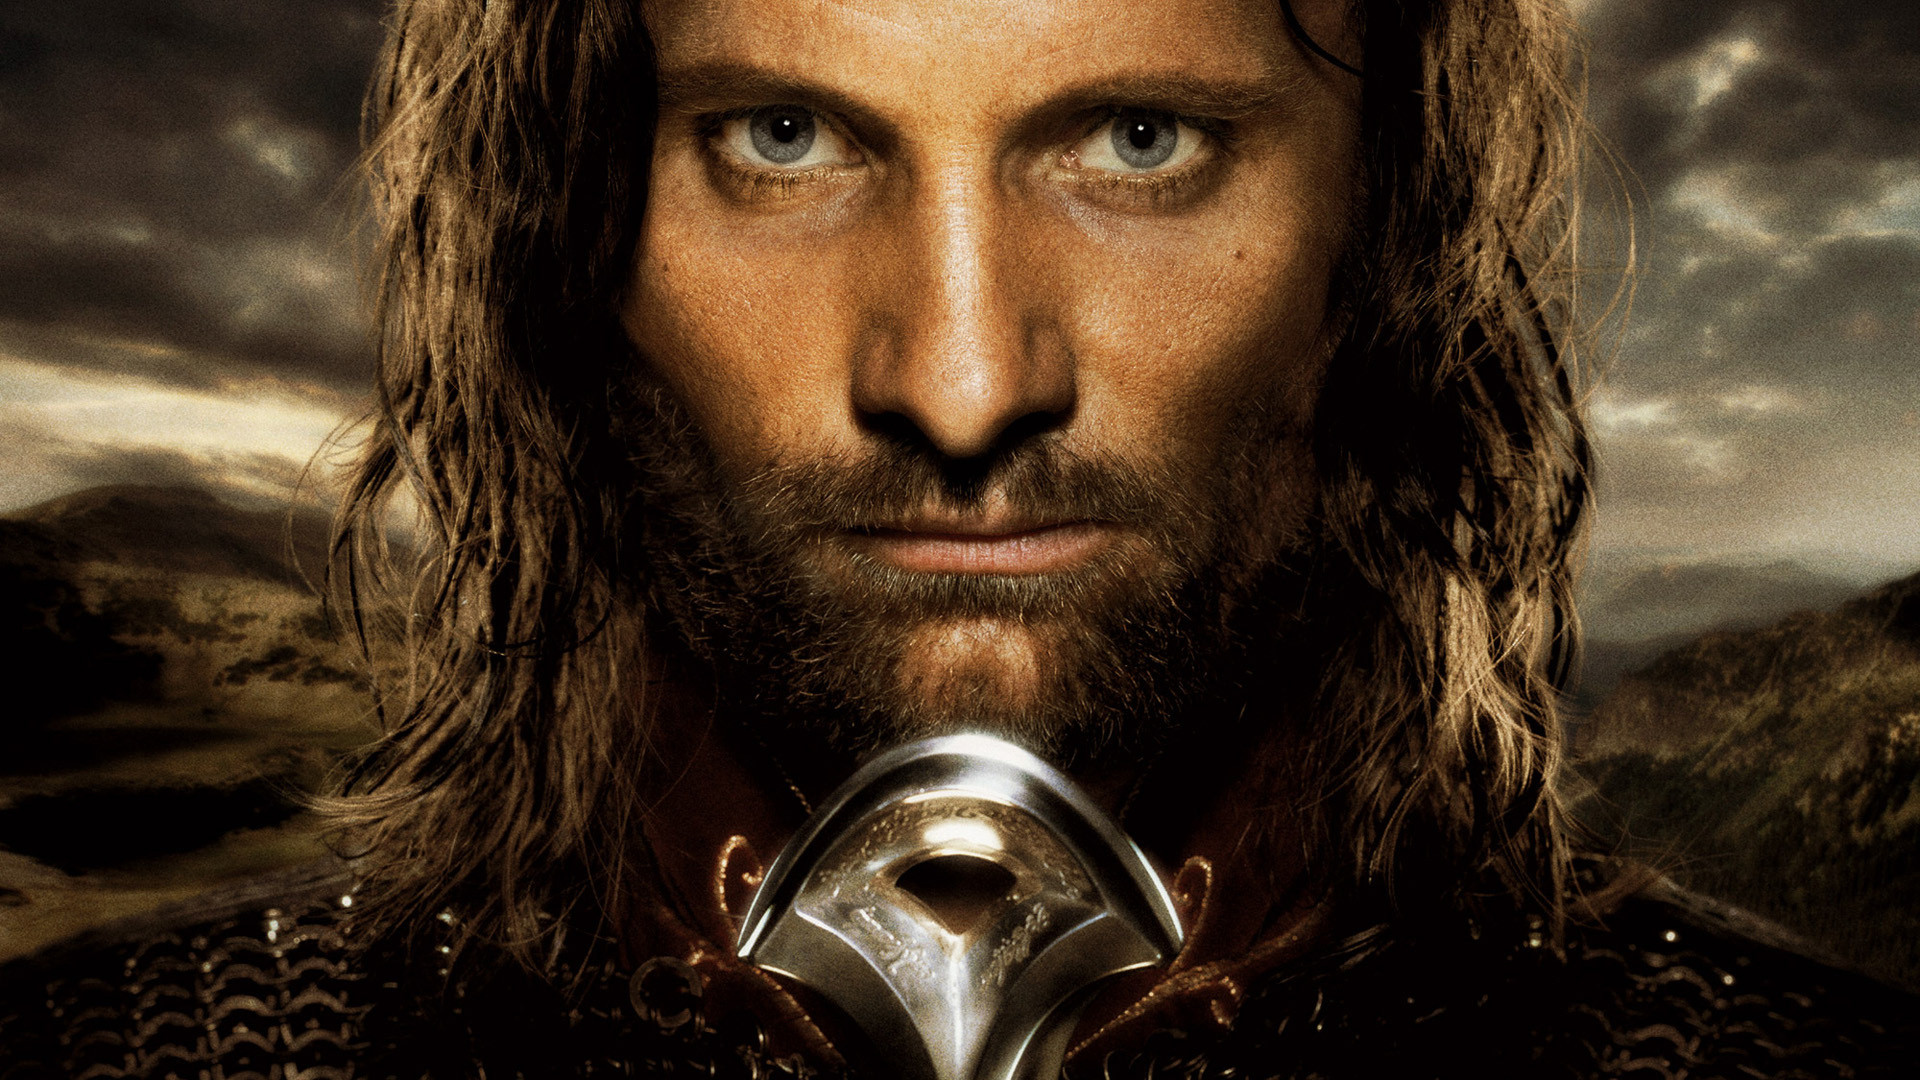 Movie Poll: If you could spend a day in Middle Earth…